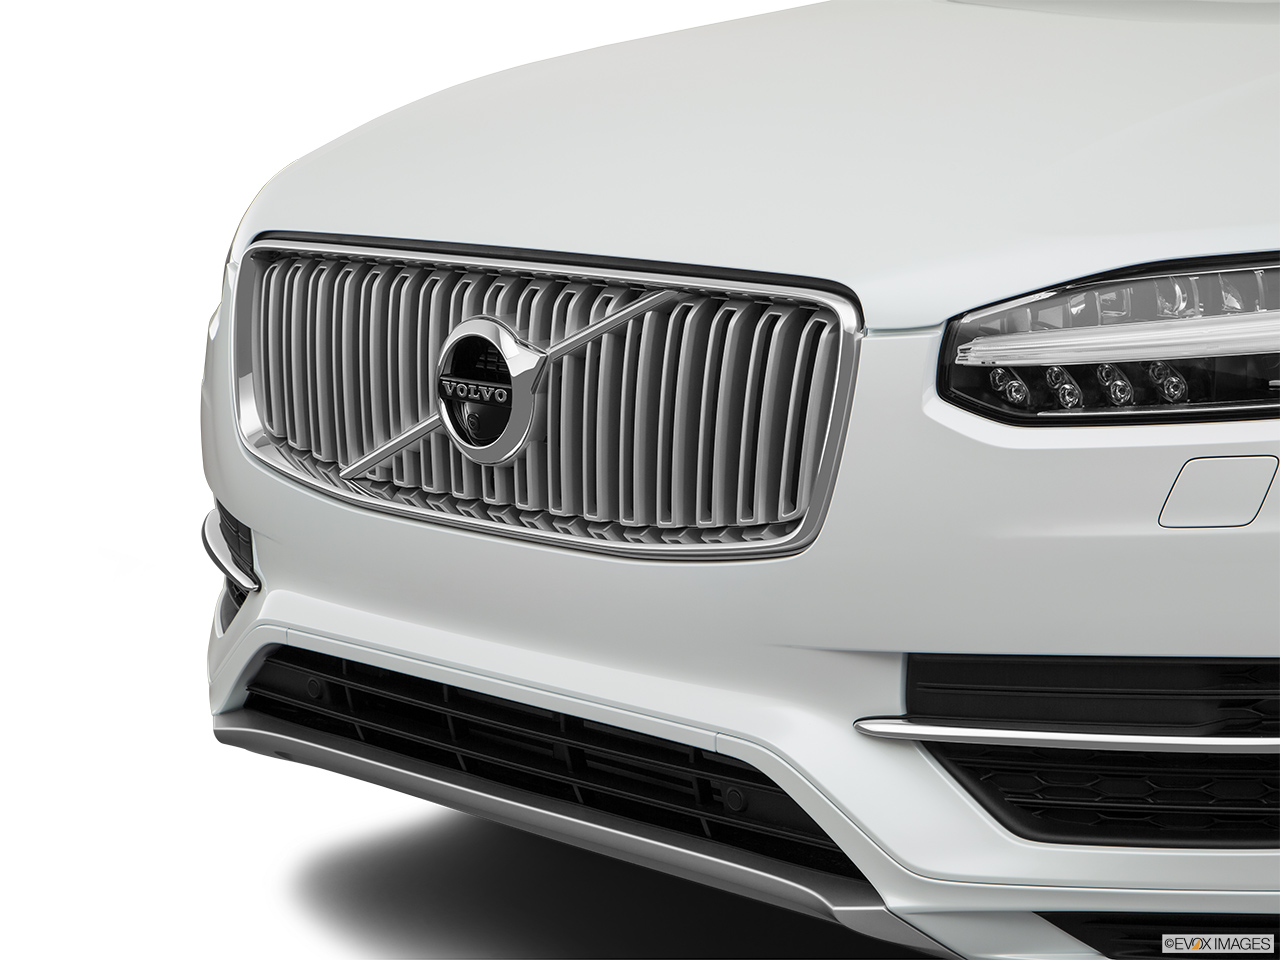 2019 Volvo XC90  T8 Inscription eAWD Plug-in Hybrid Close up of Grill. 